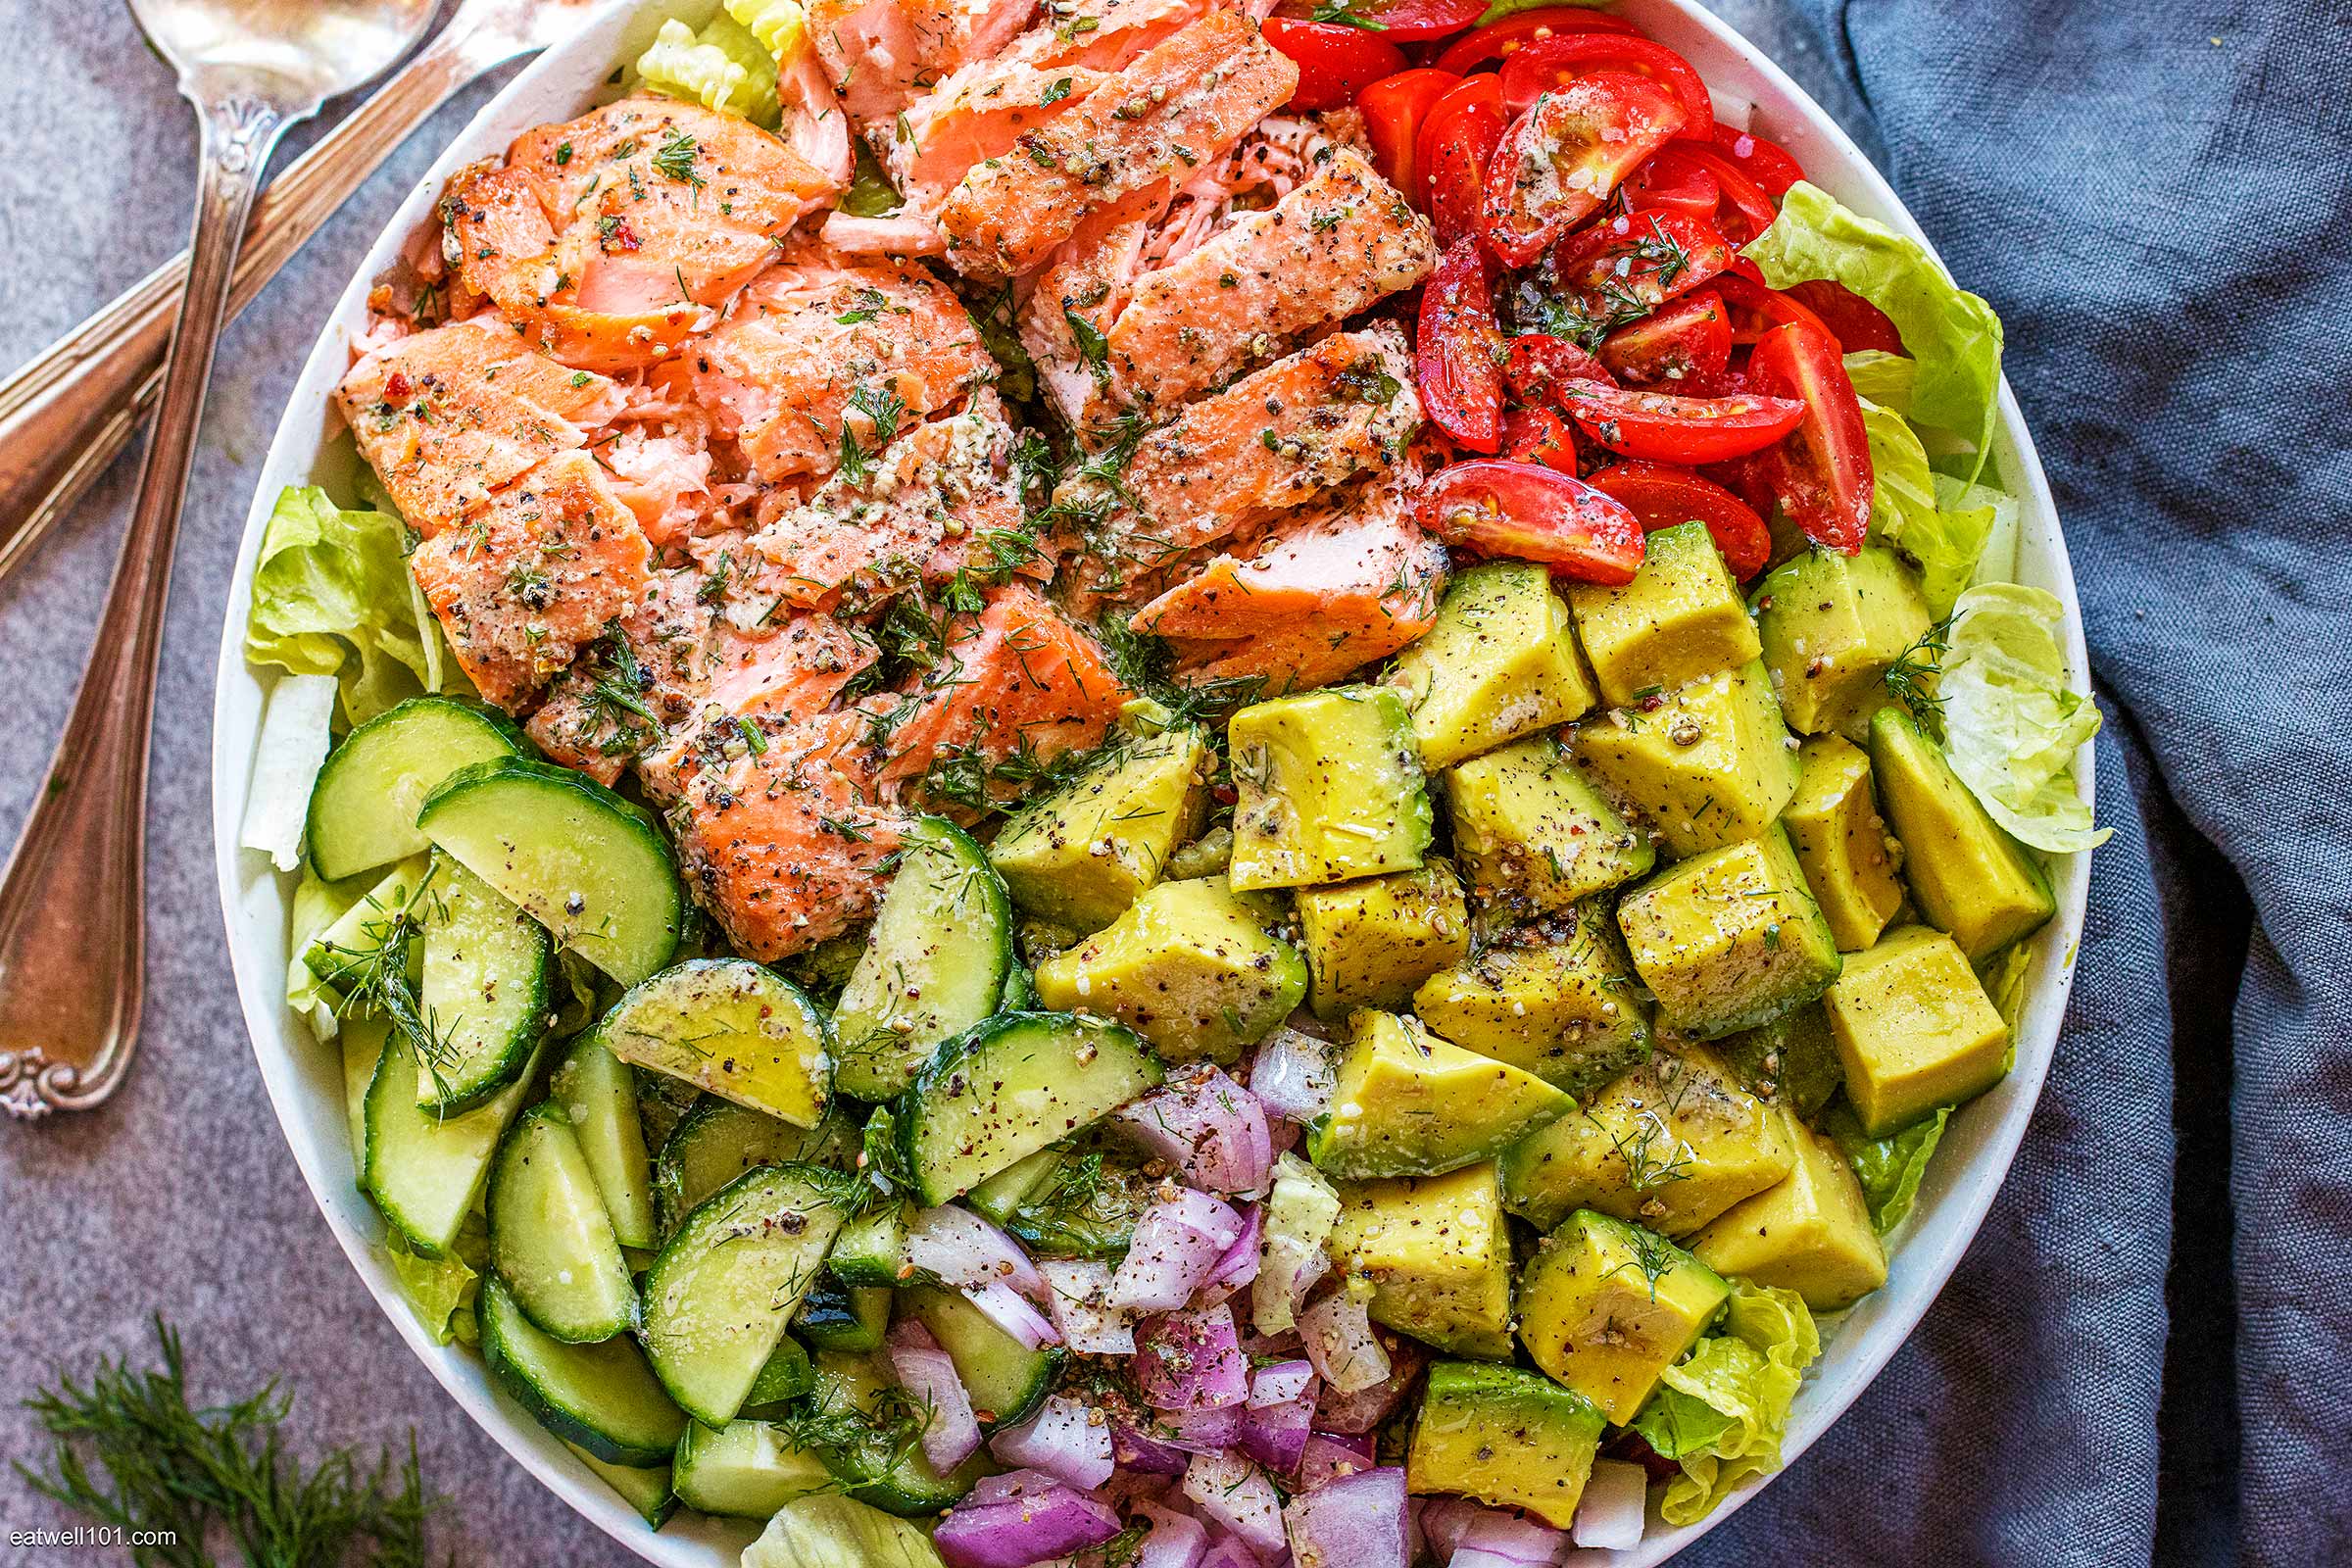 Salmon Salad with Avocado, Tomato, and Cucumber